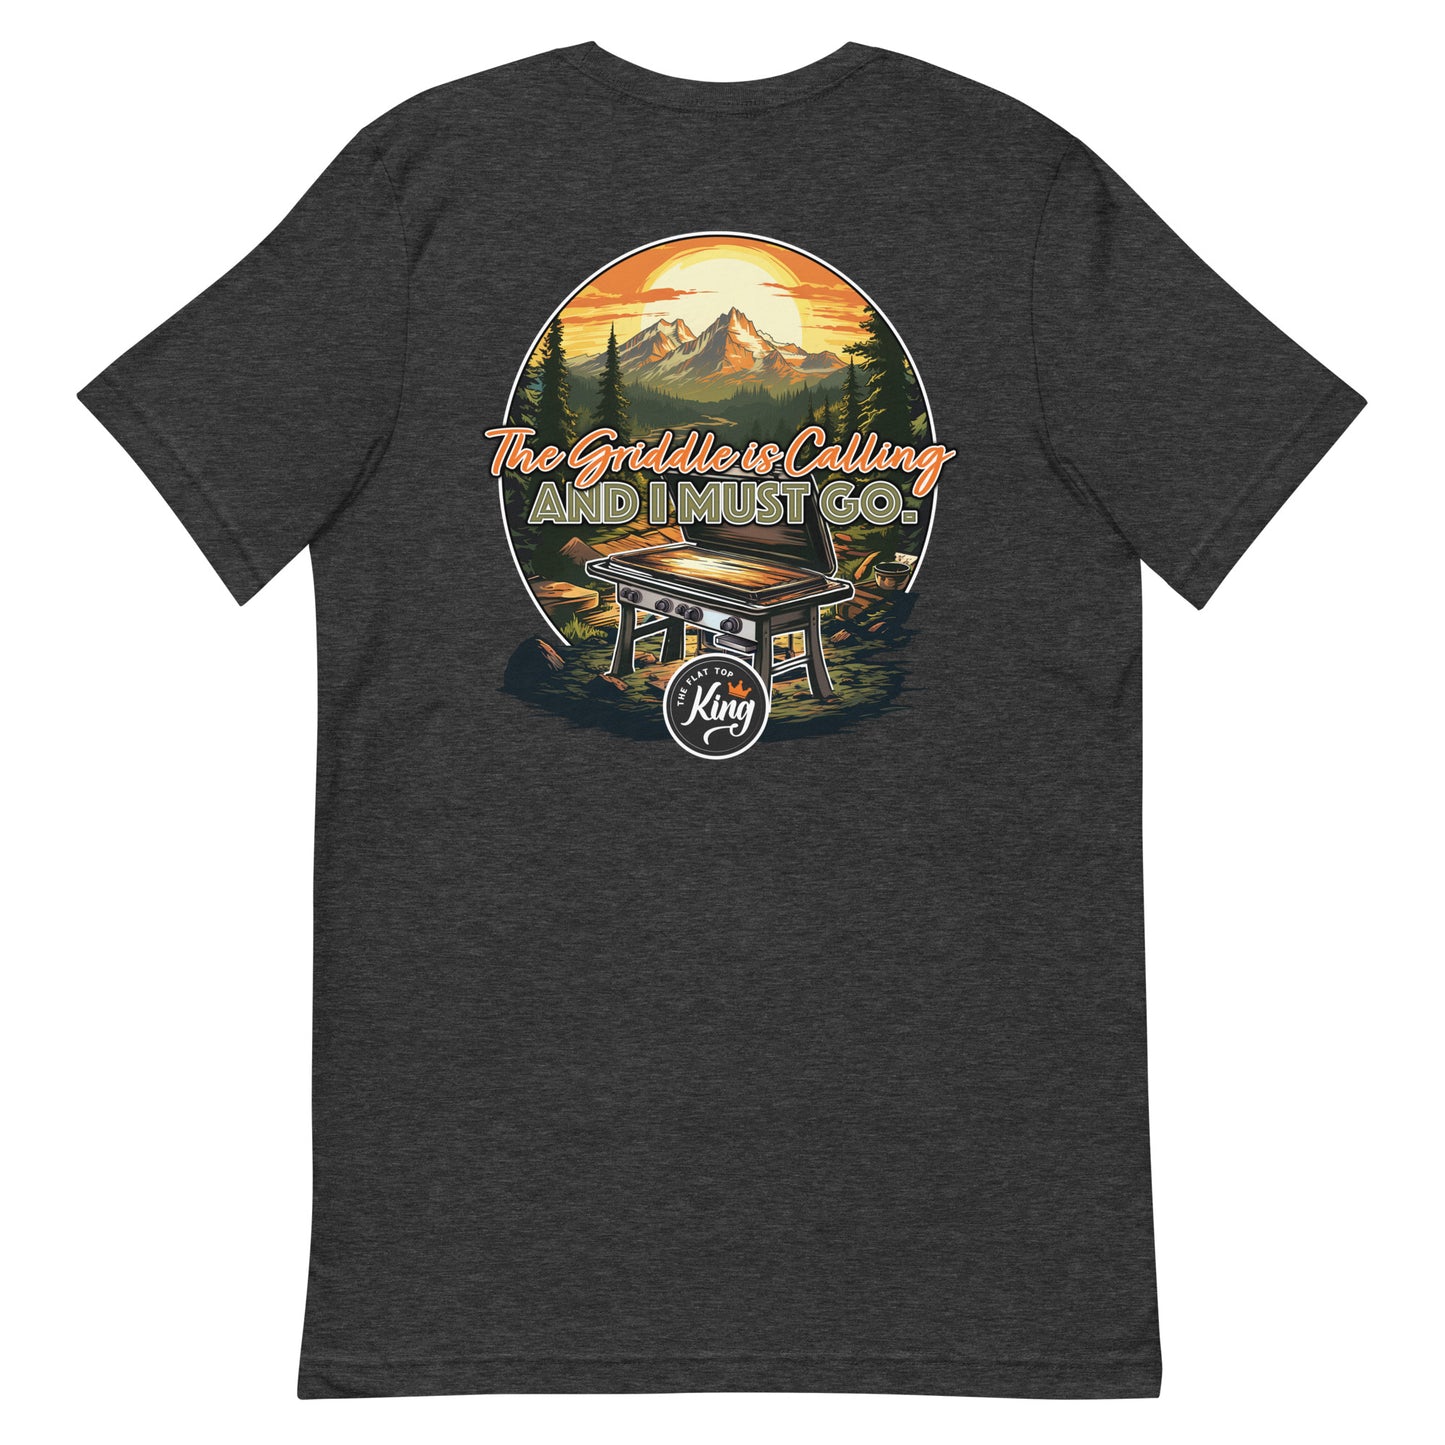 "The Griddle is Calling" Shirt